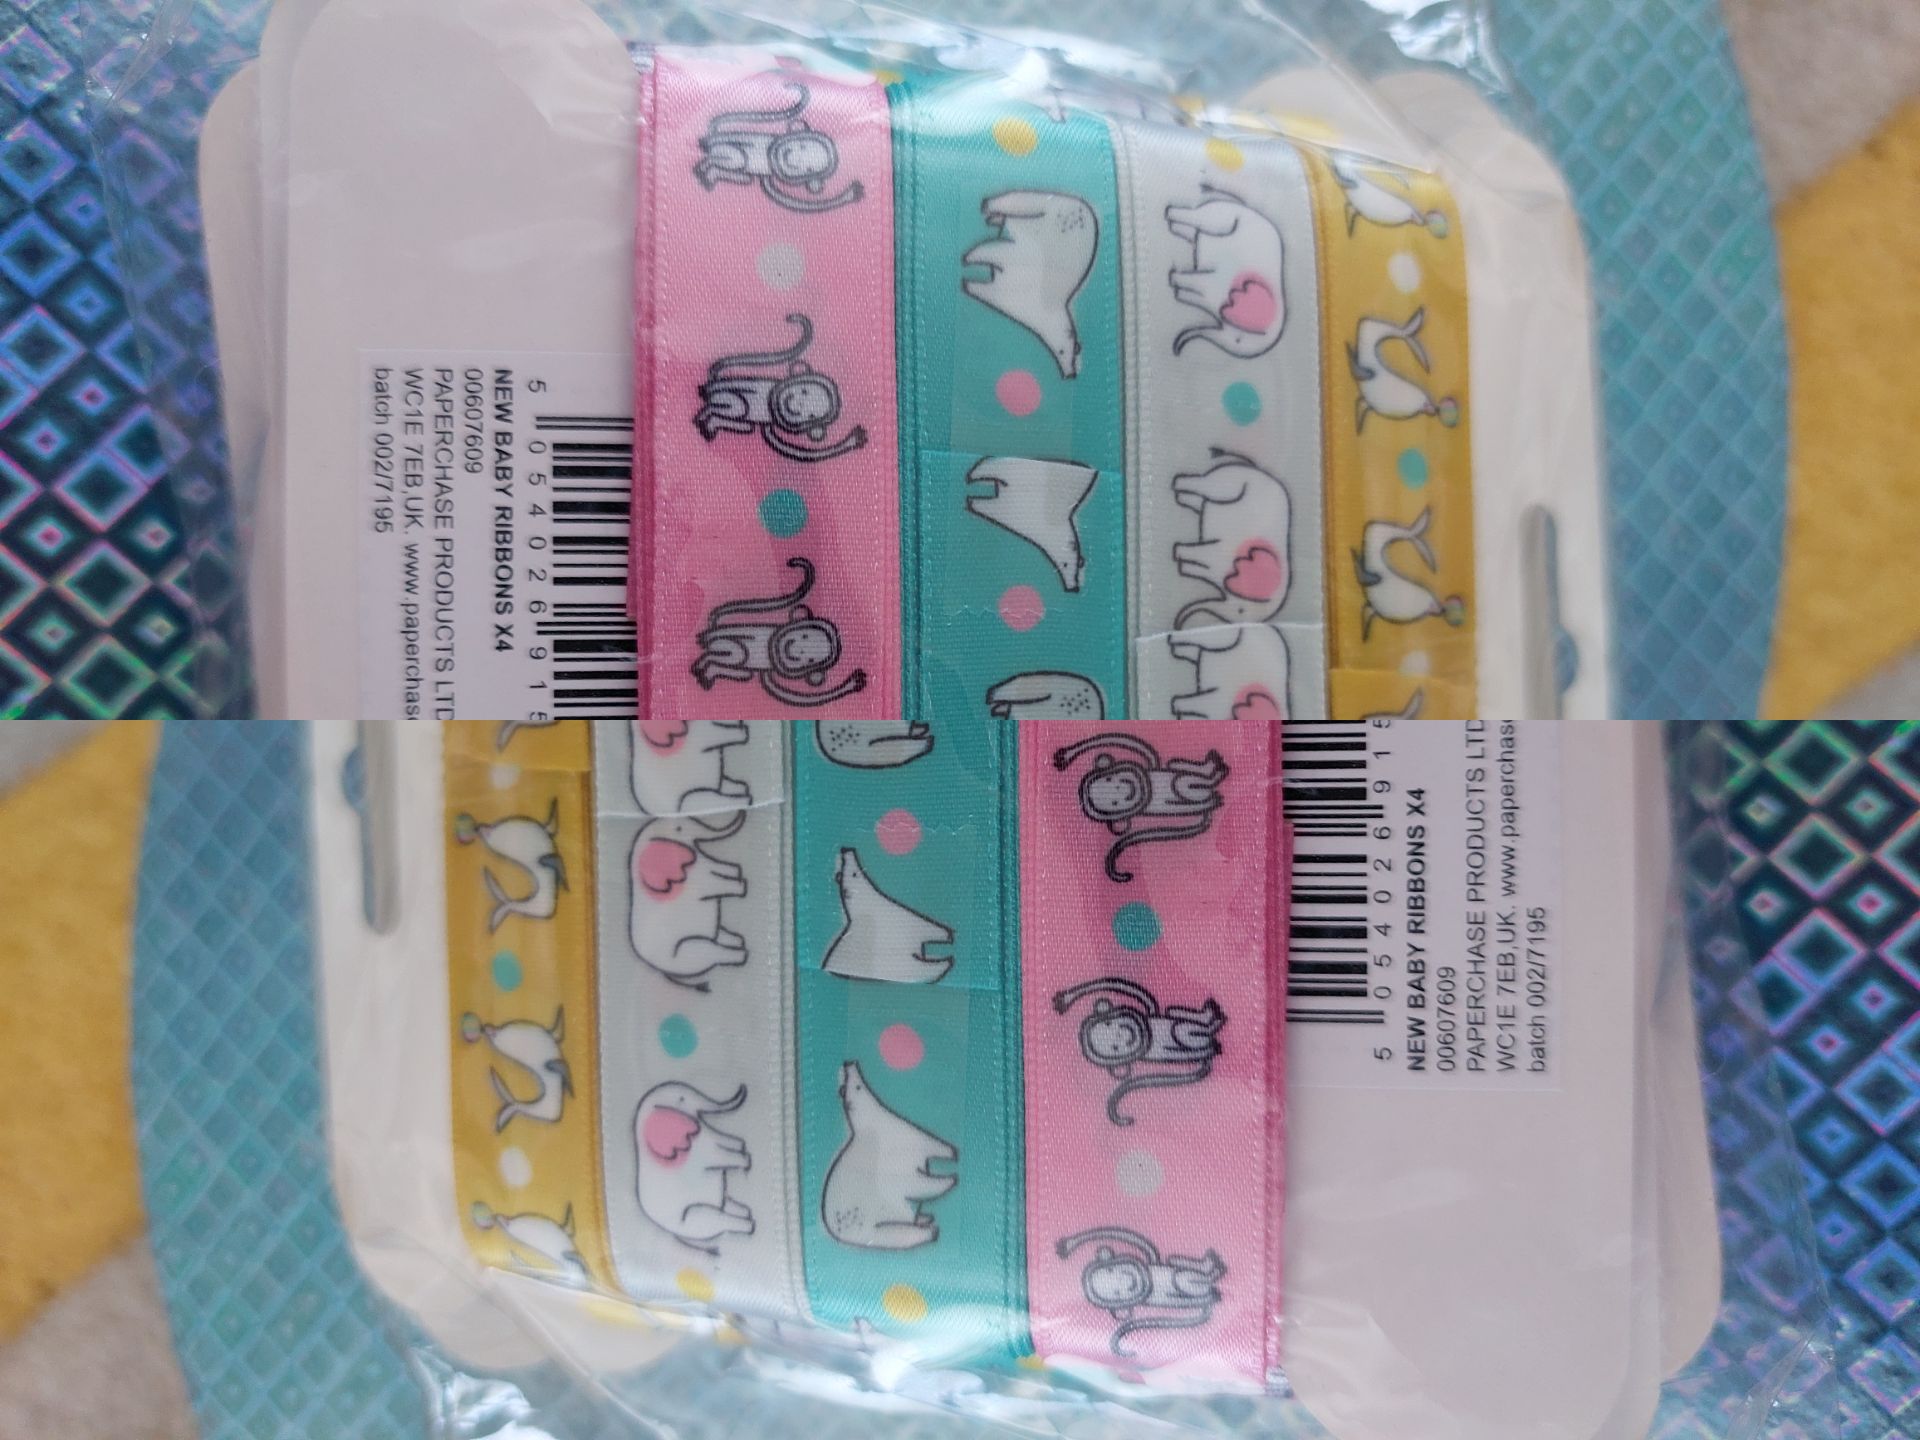 Novelty Animal Baby Ribbons From Paperchase x 8 Cards of 4